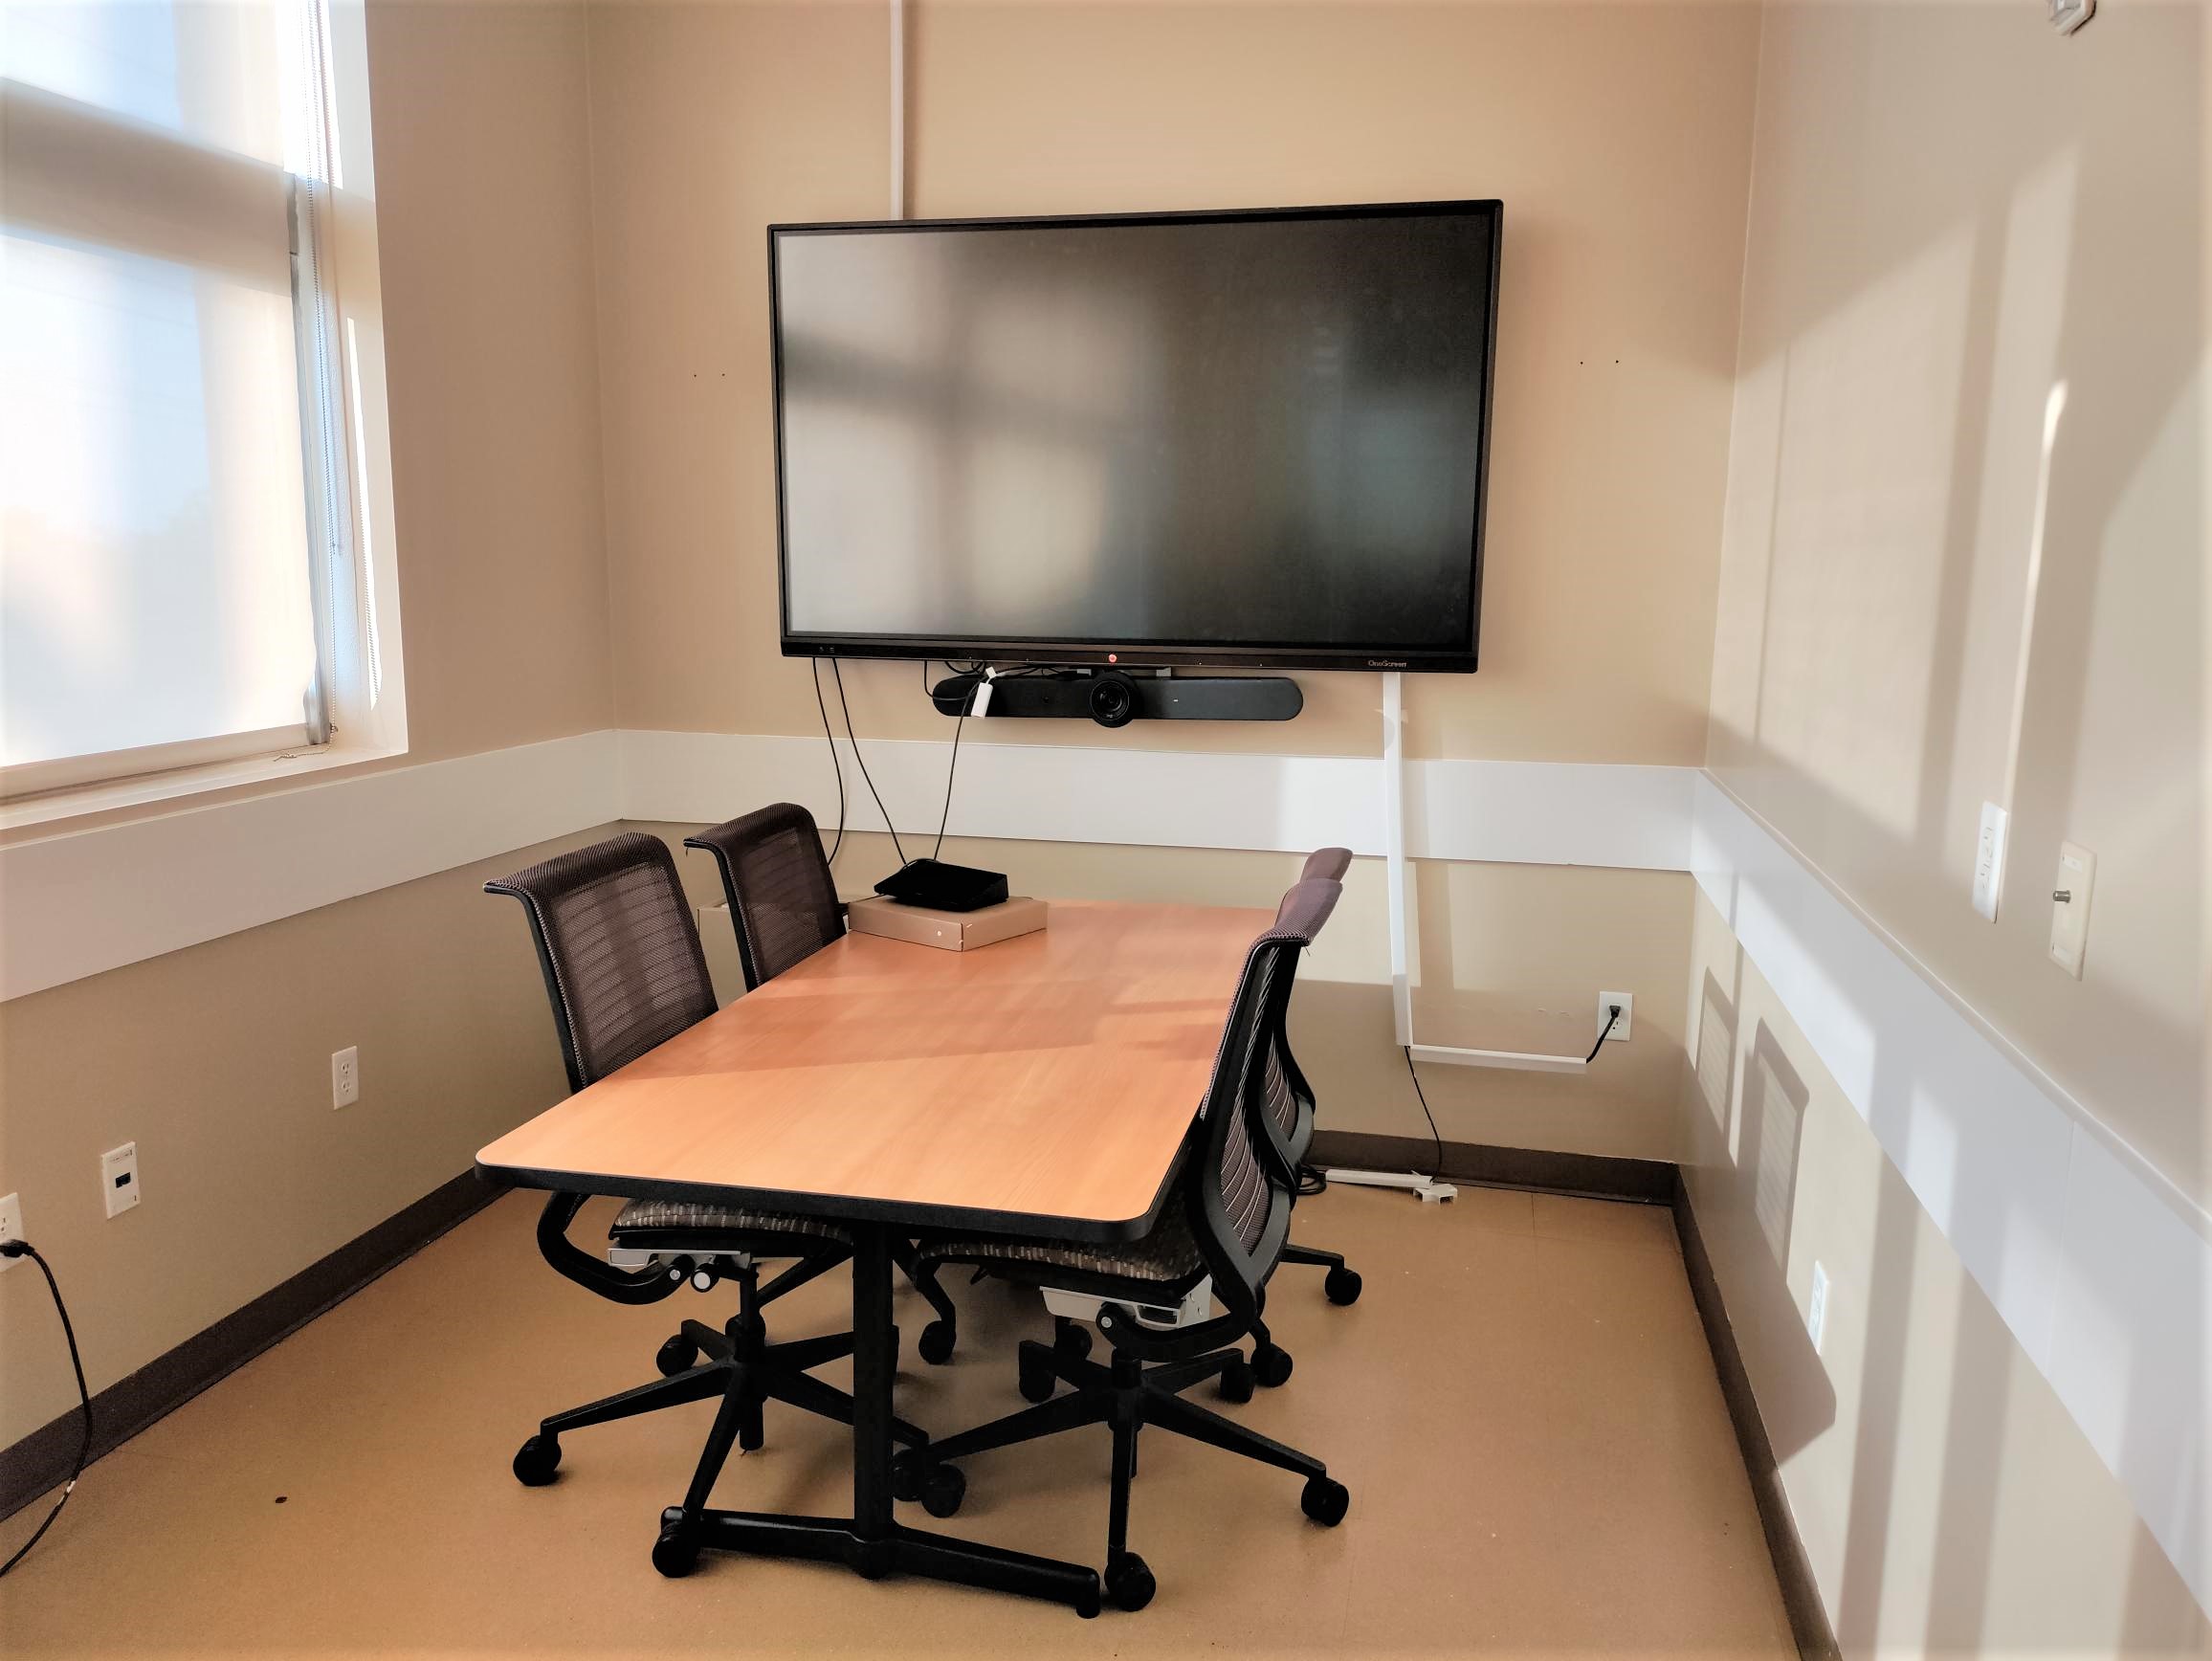 Study Room 204 shows a table with four chairs, a smartboard, and an air filter. Blinds cover a window.